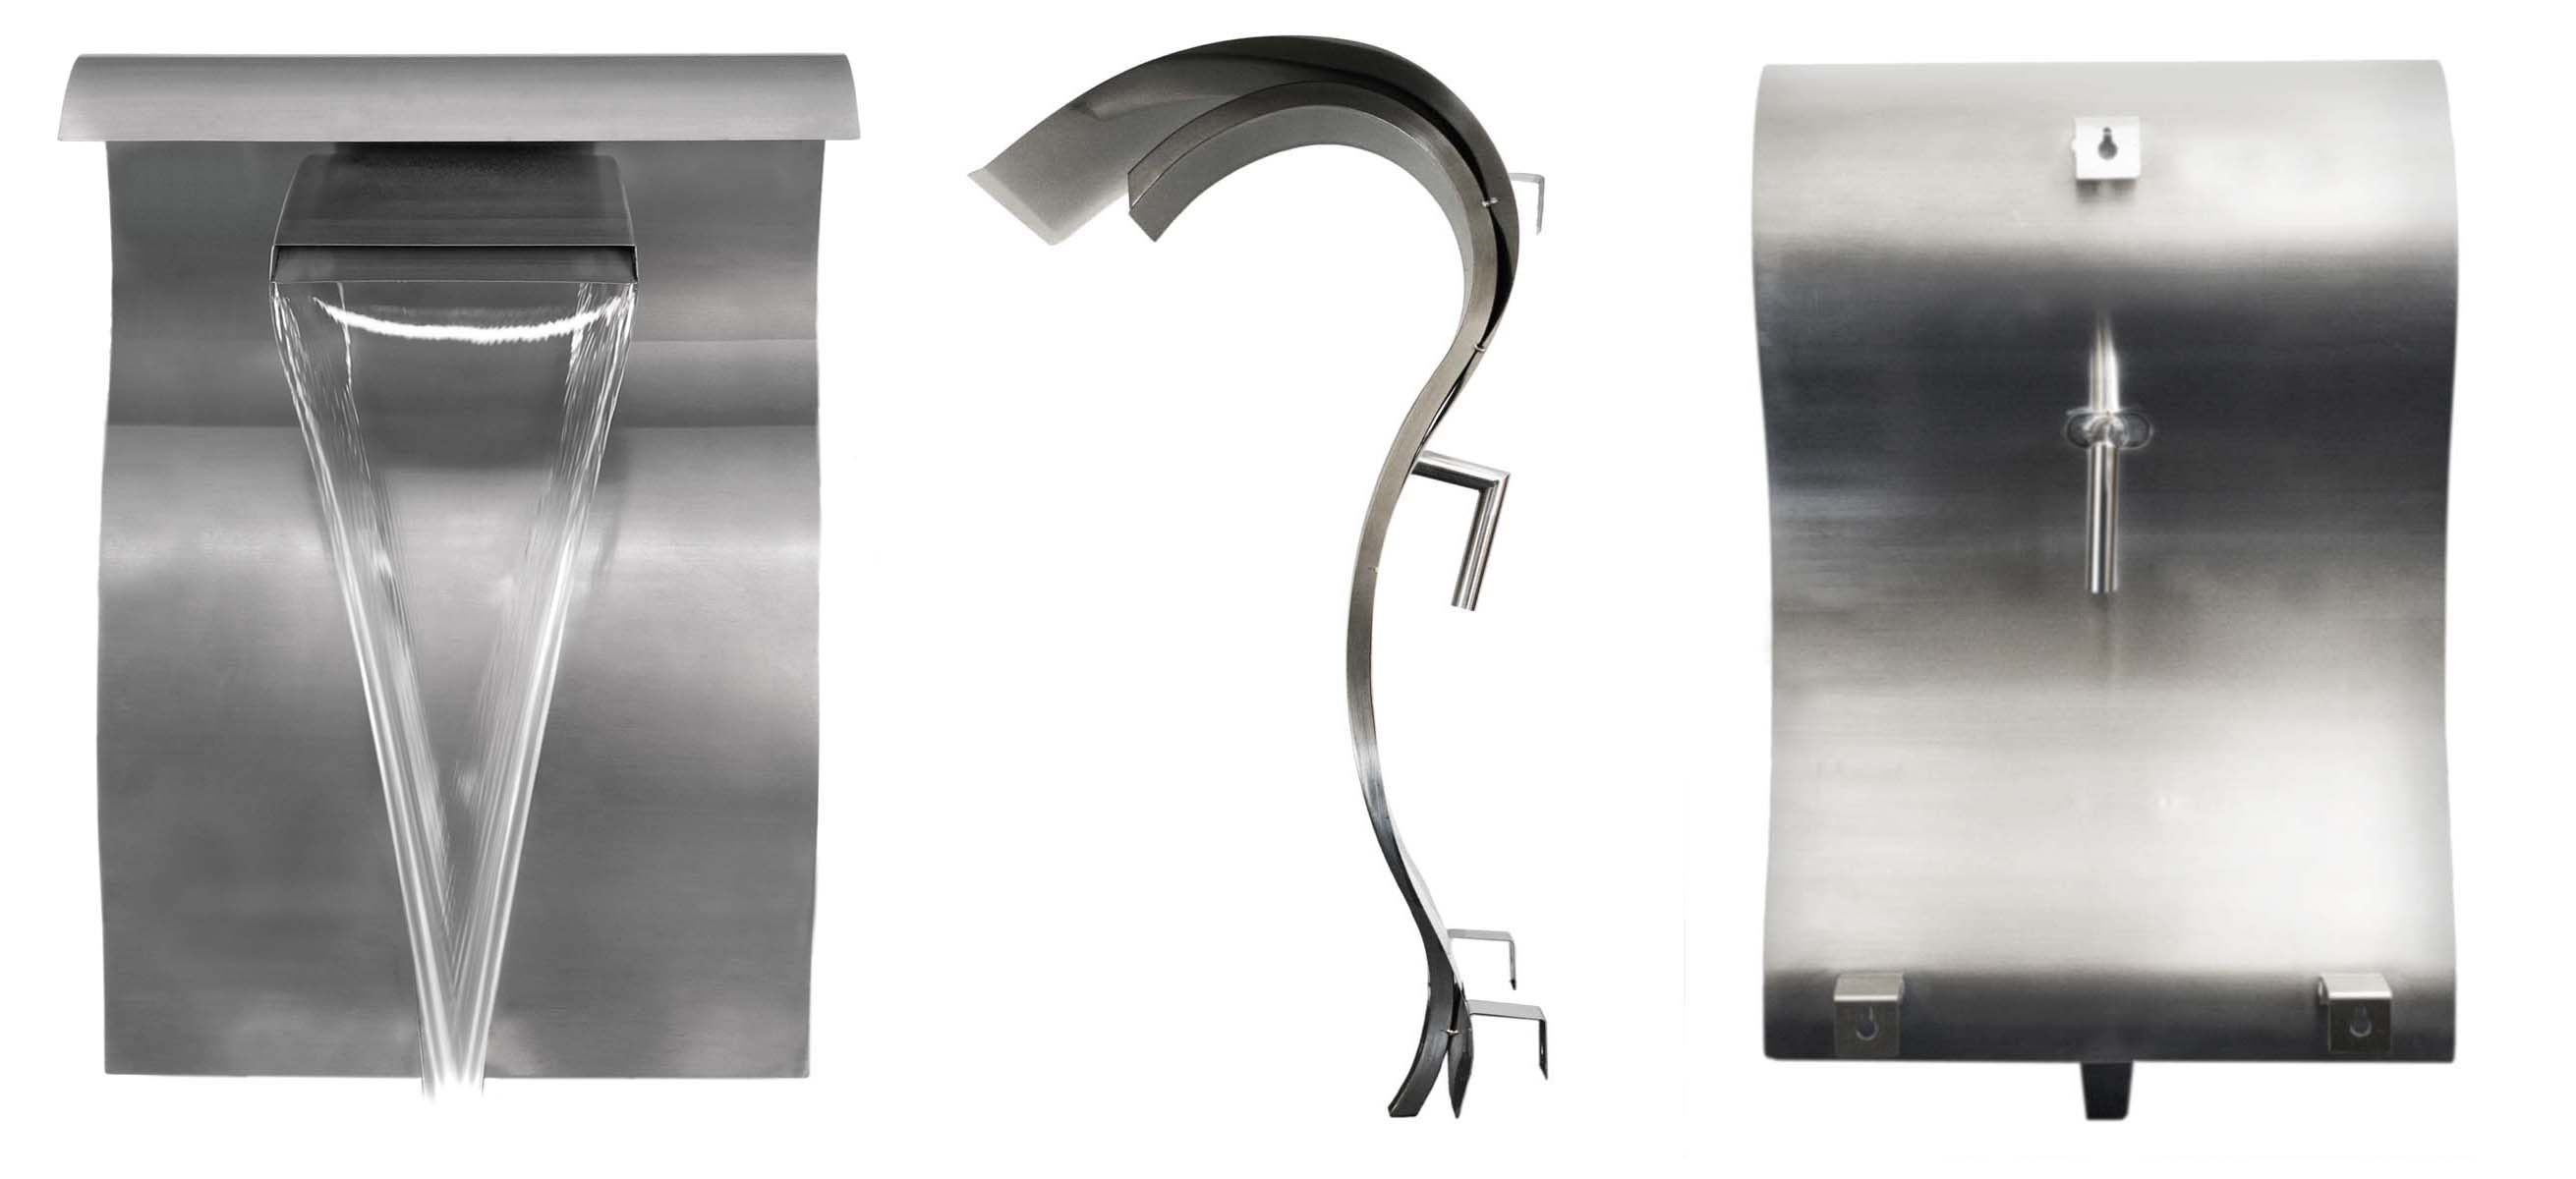 H75cm Cascading Swan Wall Mounted Stainless Steel Water Feature by Ambienté